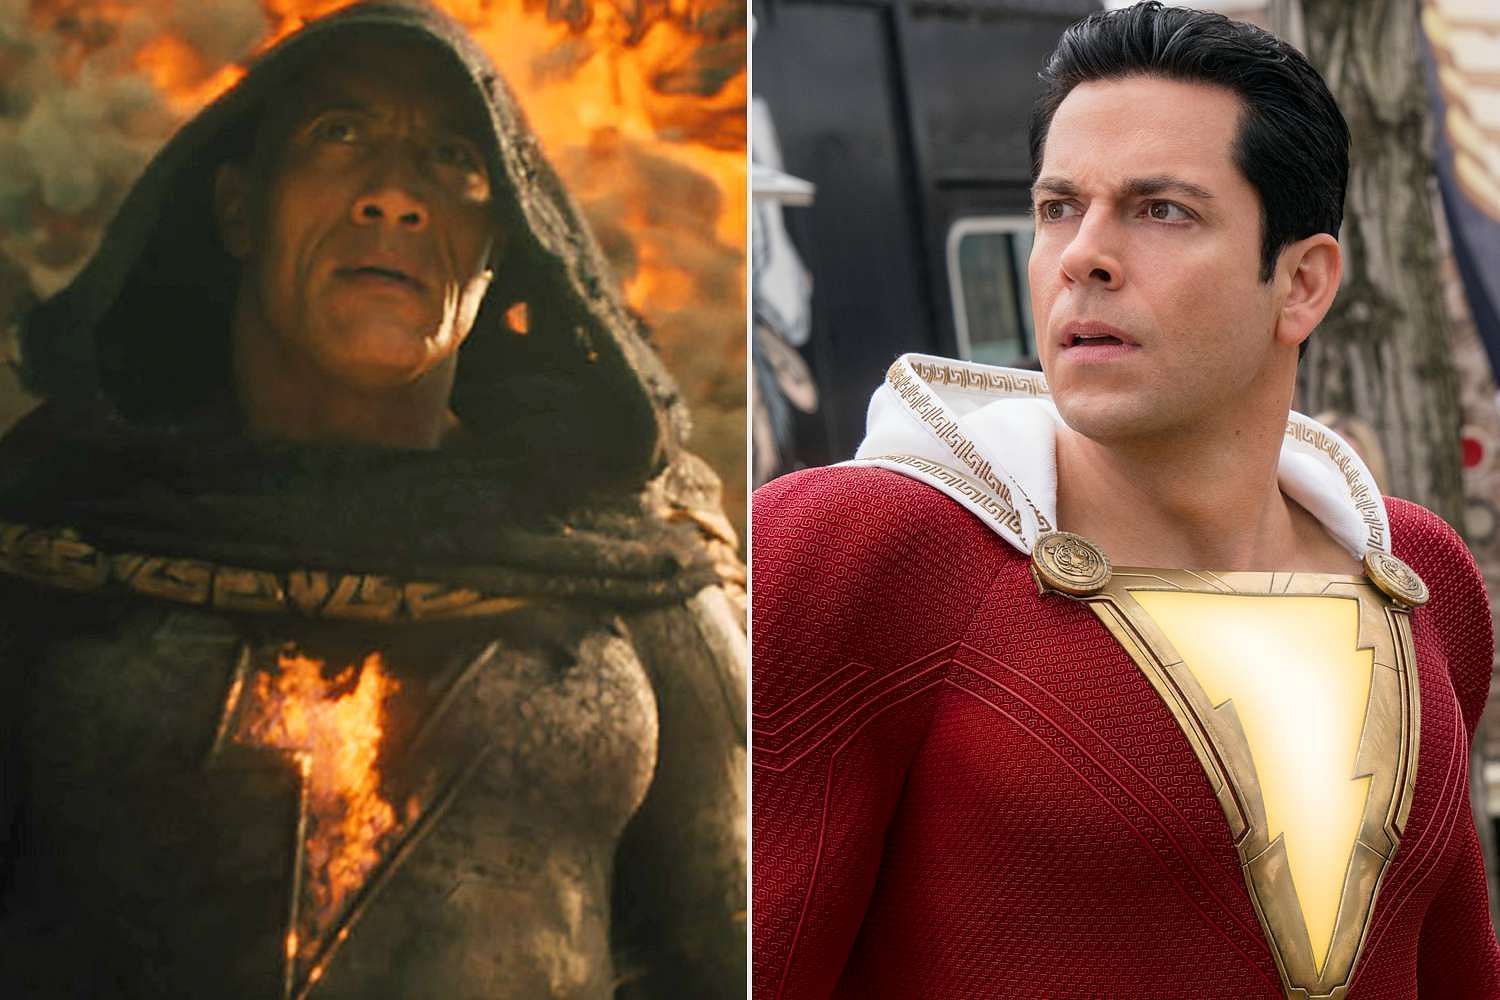 Shazam 2's Post-Credits Scenes Count Reportedly Revealed